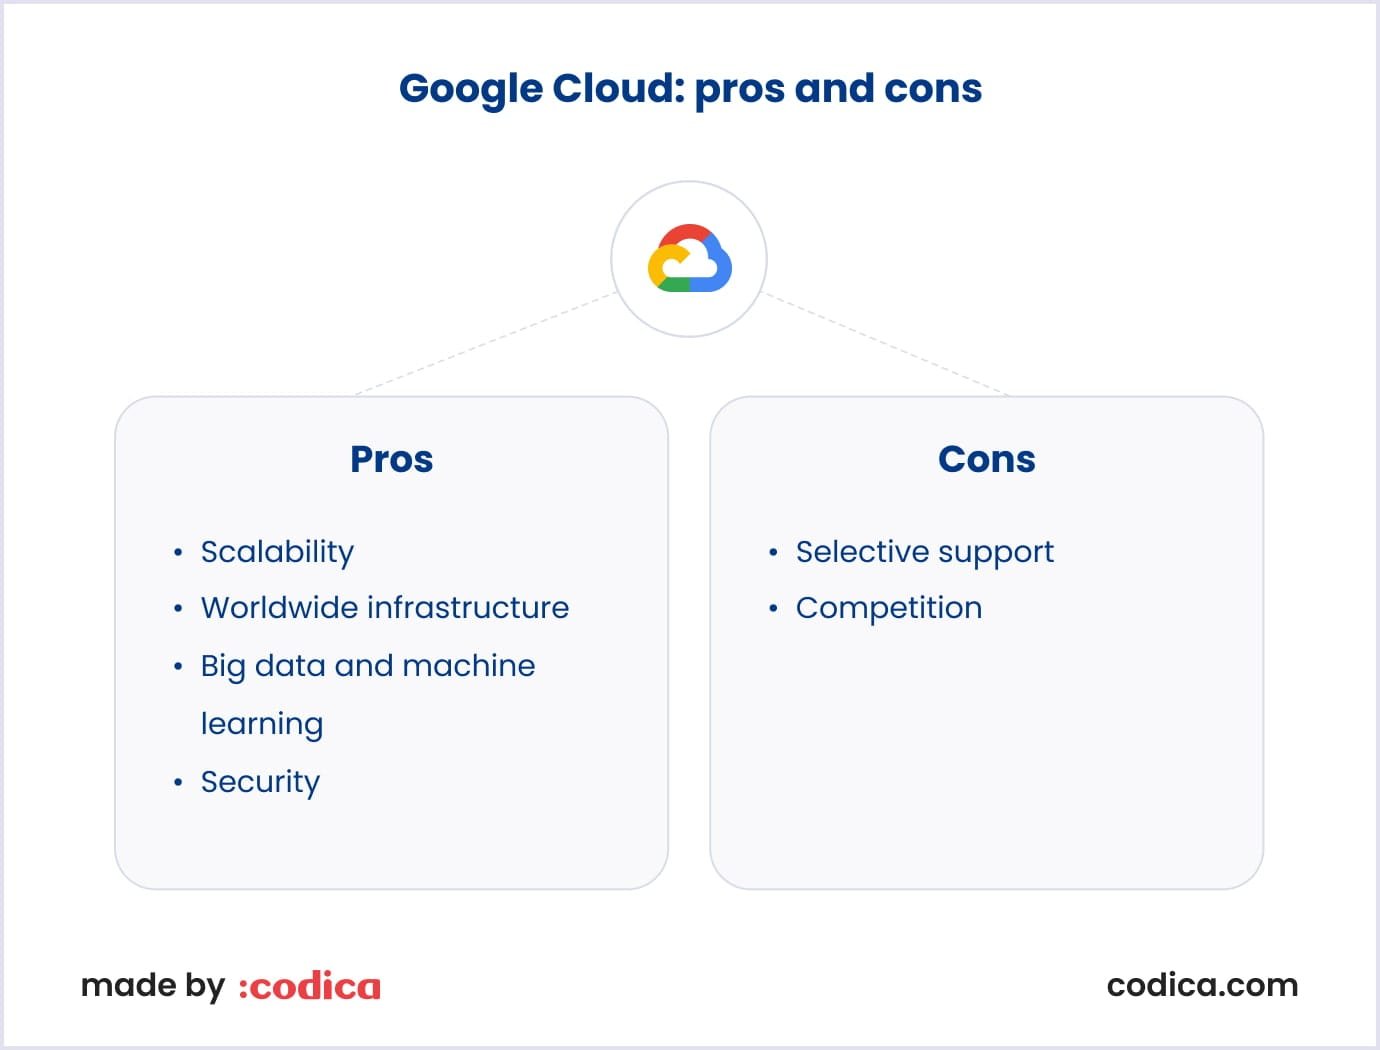 Google Cloud pros and cons